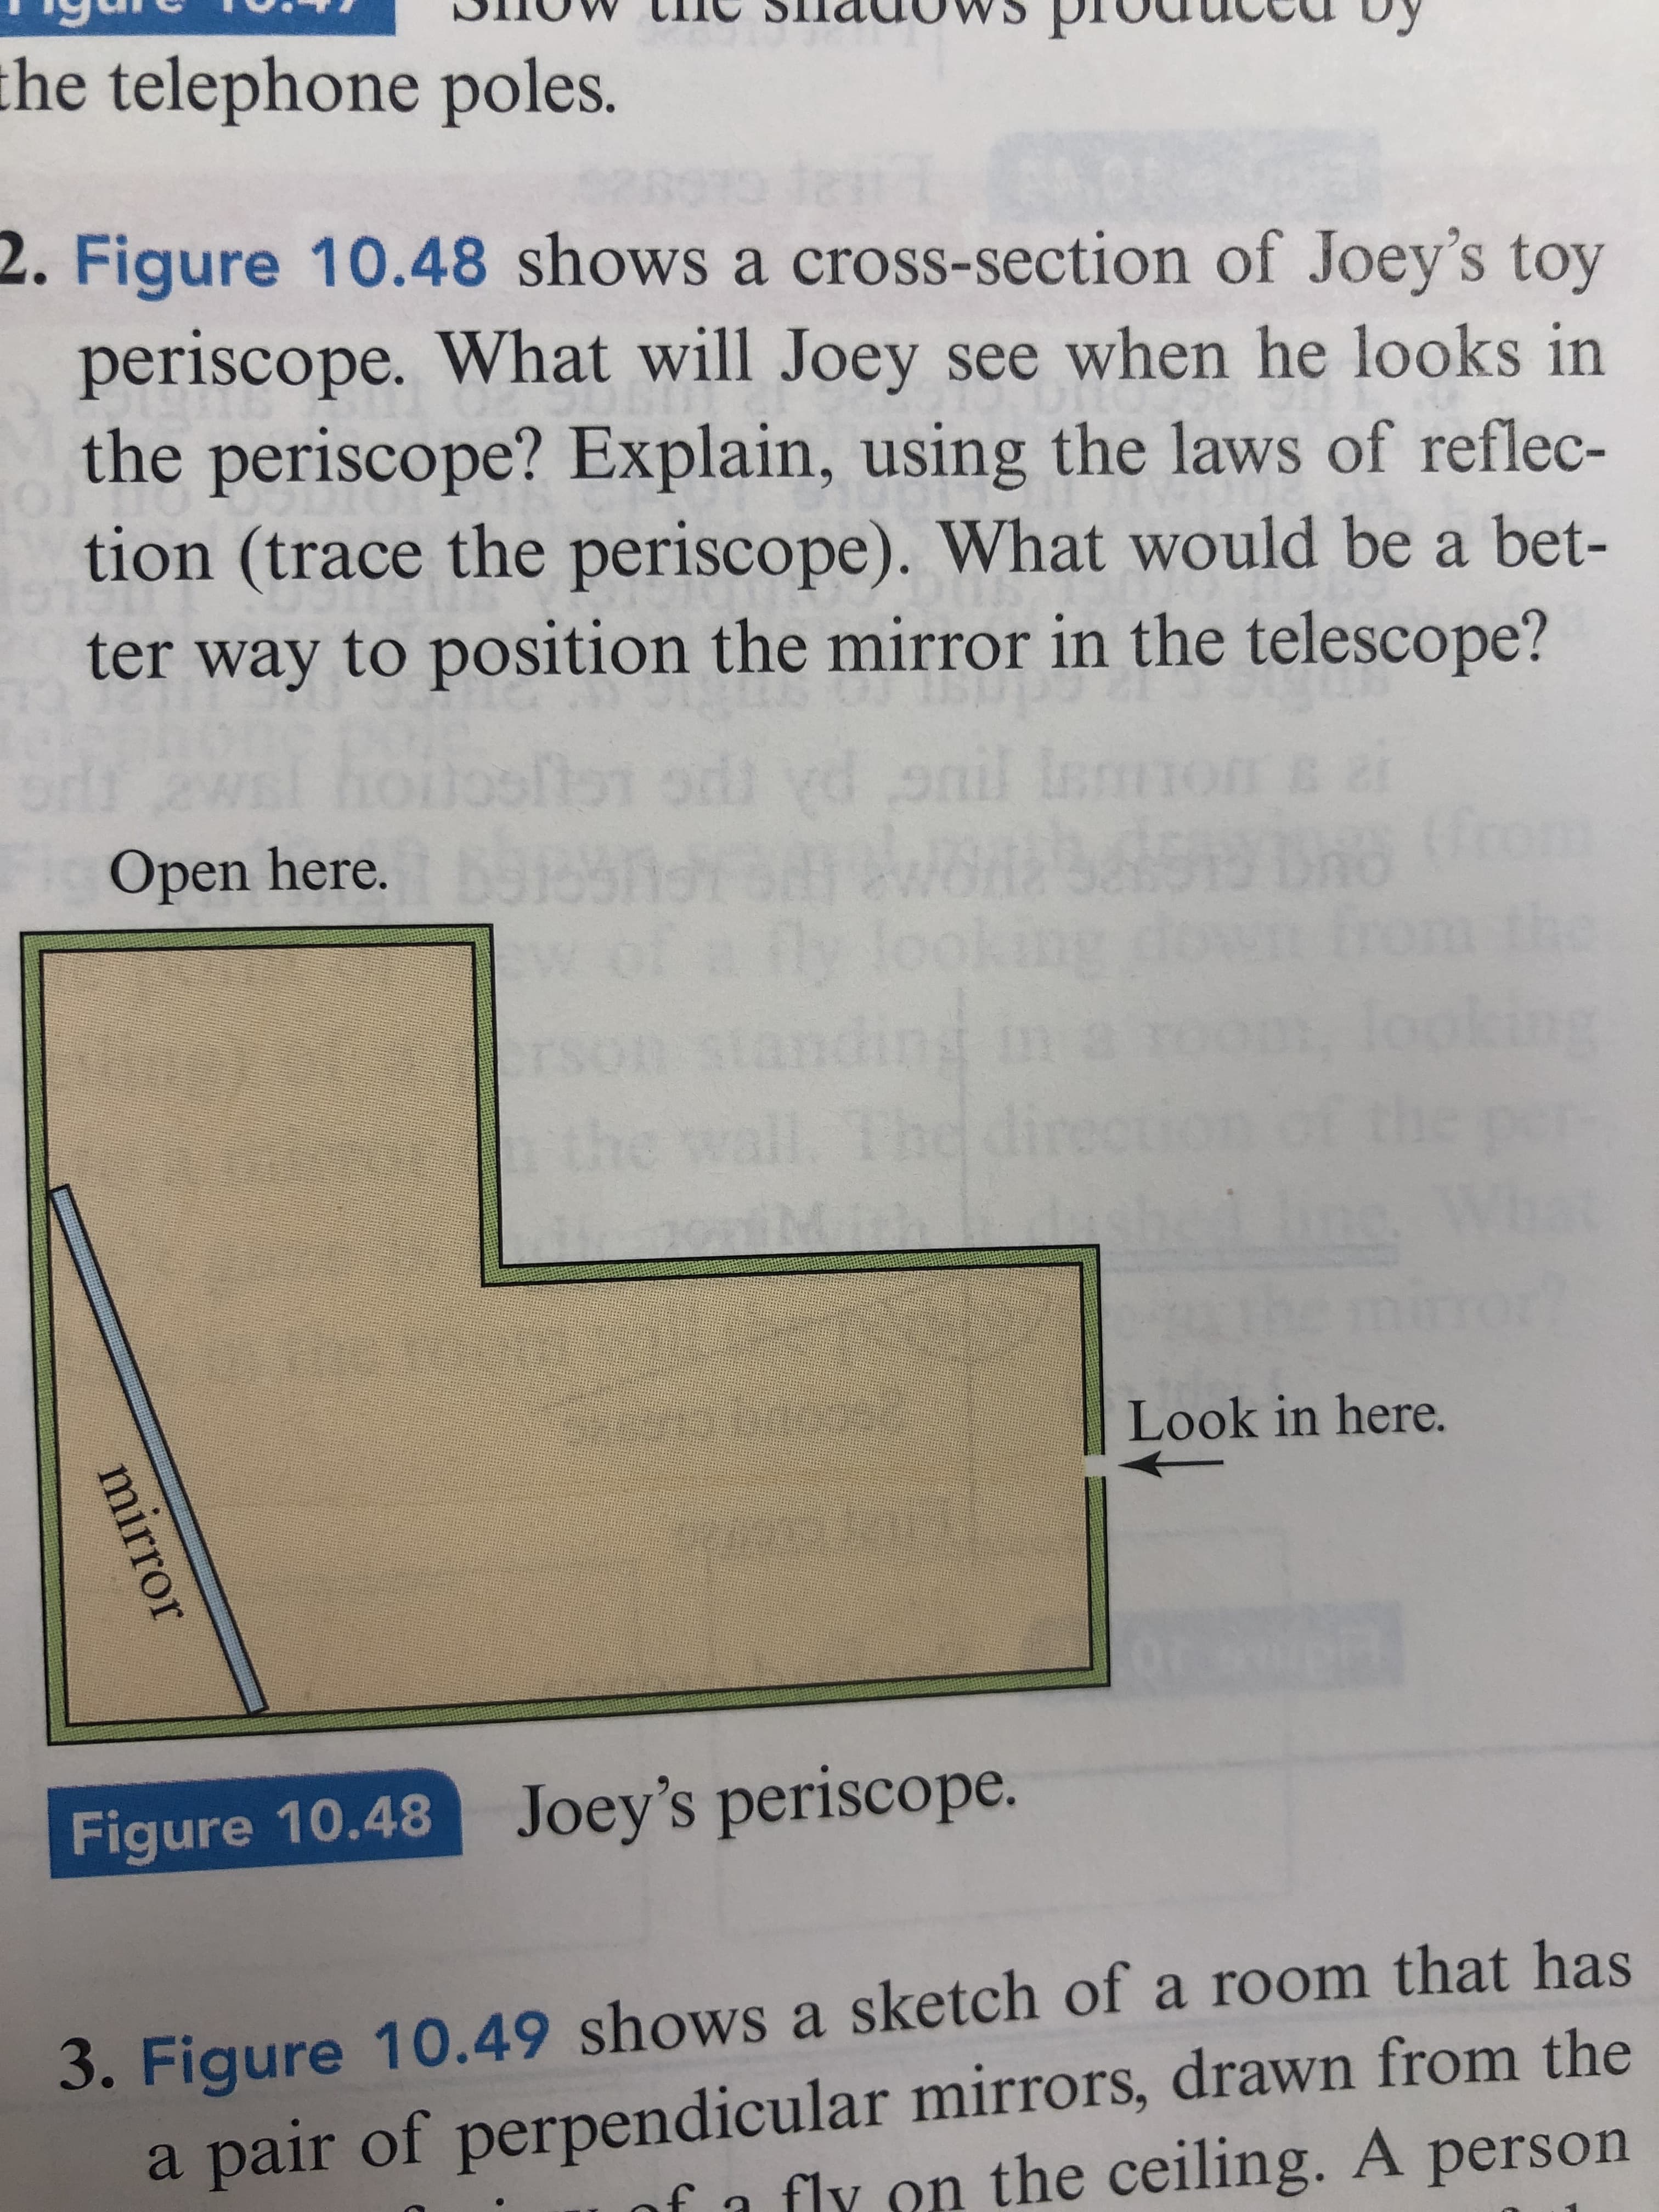 the telephone poles.
2. Figure 10.48 shows a cross-section of Joey's toy
periscope. What will Joey see when he looks in
the periscope? Explain, using the laws of reflec-
tion (trace the periscope). What would be a bet-
ter way to position the mirror in the telescope?
onil Inmnc
emon
Open here. o5noradwod 519hO
the
ing
ding
the wall
1.The dire
crson st
Look in here.
Figure 10.48 Joey's periscope.
3. Figure 10.49 shows a sketch of a room that has
a pair of perpendicular mirrors, drawn from the
fa fly on the ceiling. A person
mirror
